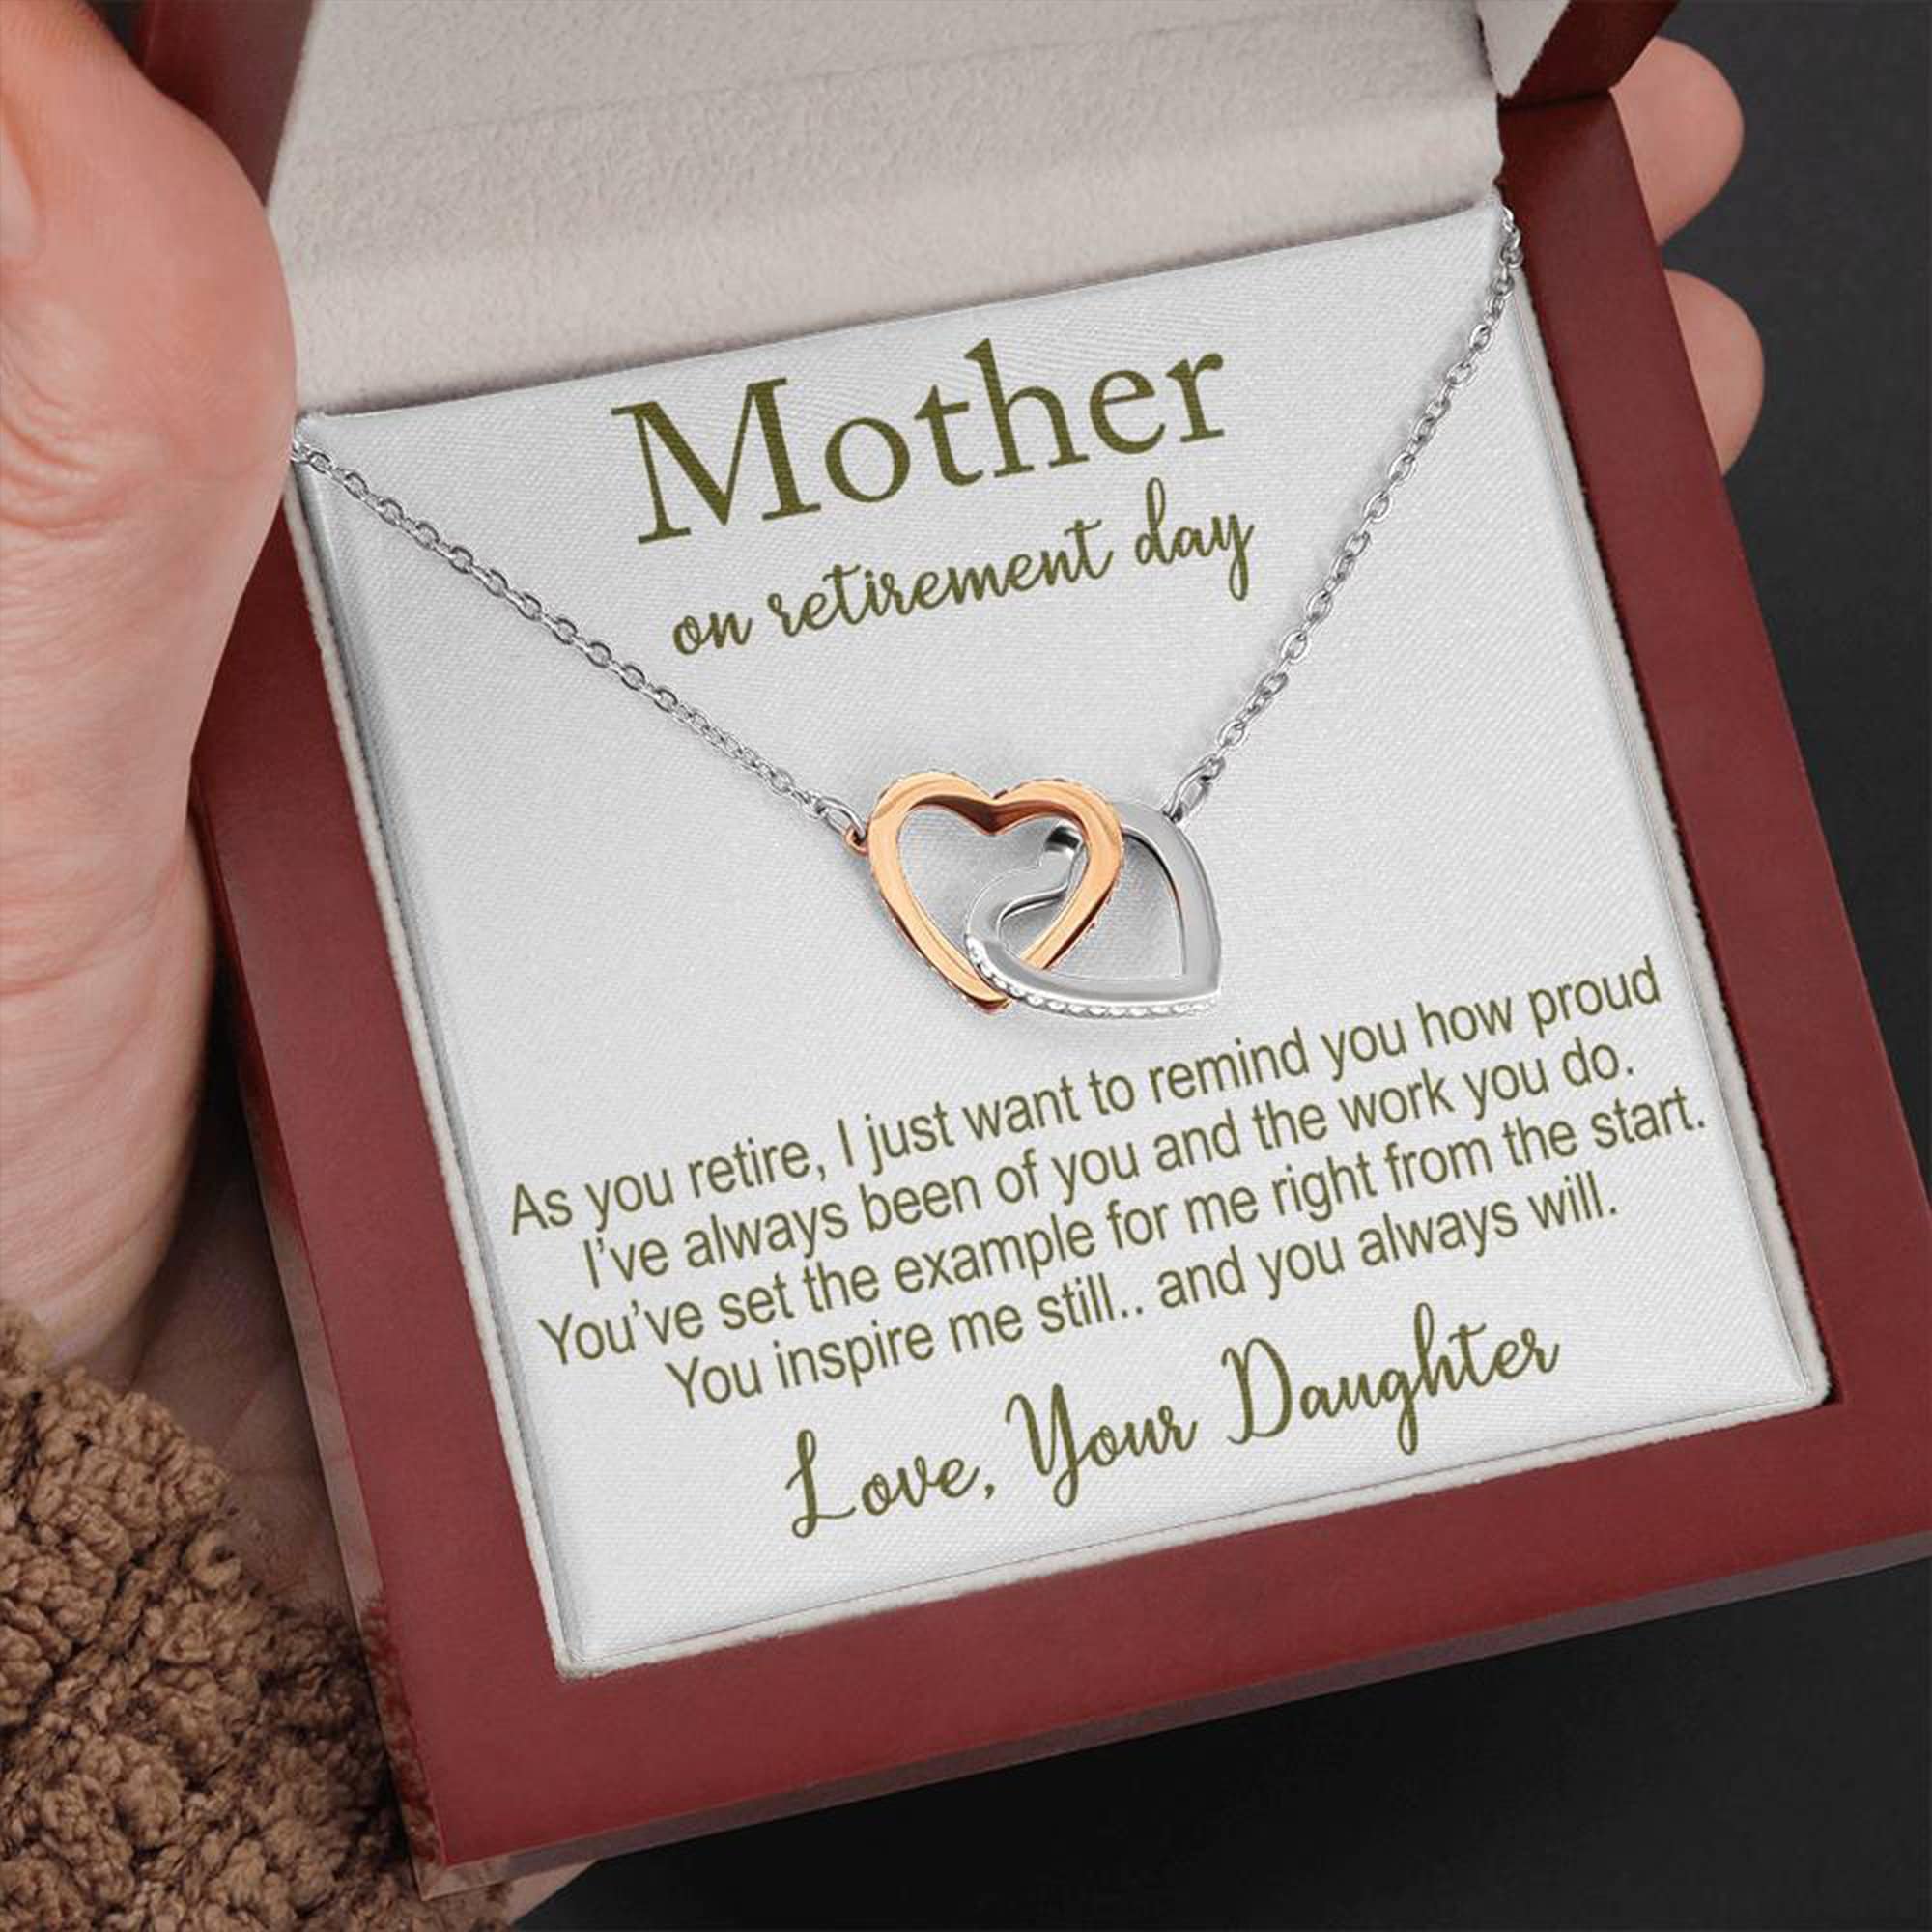 Gifts for Mom - Mom Gifts Set Includes Sterling Silver Necklace，Earrings,  Pink Marble Jewelry Trays,Pink Marble Mug, Scented Candle and Flower – Best  Mother's Day Birthday Gift Set 